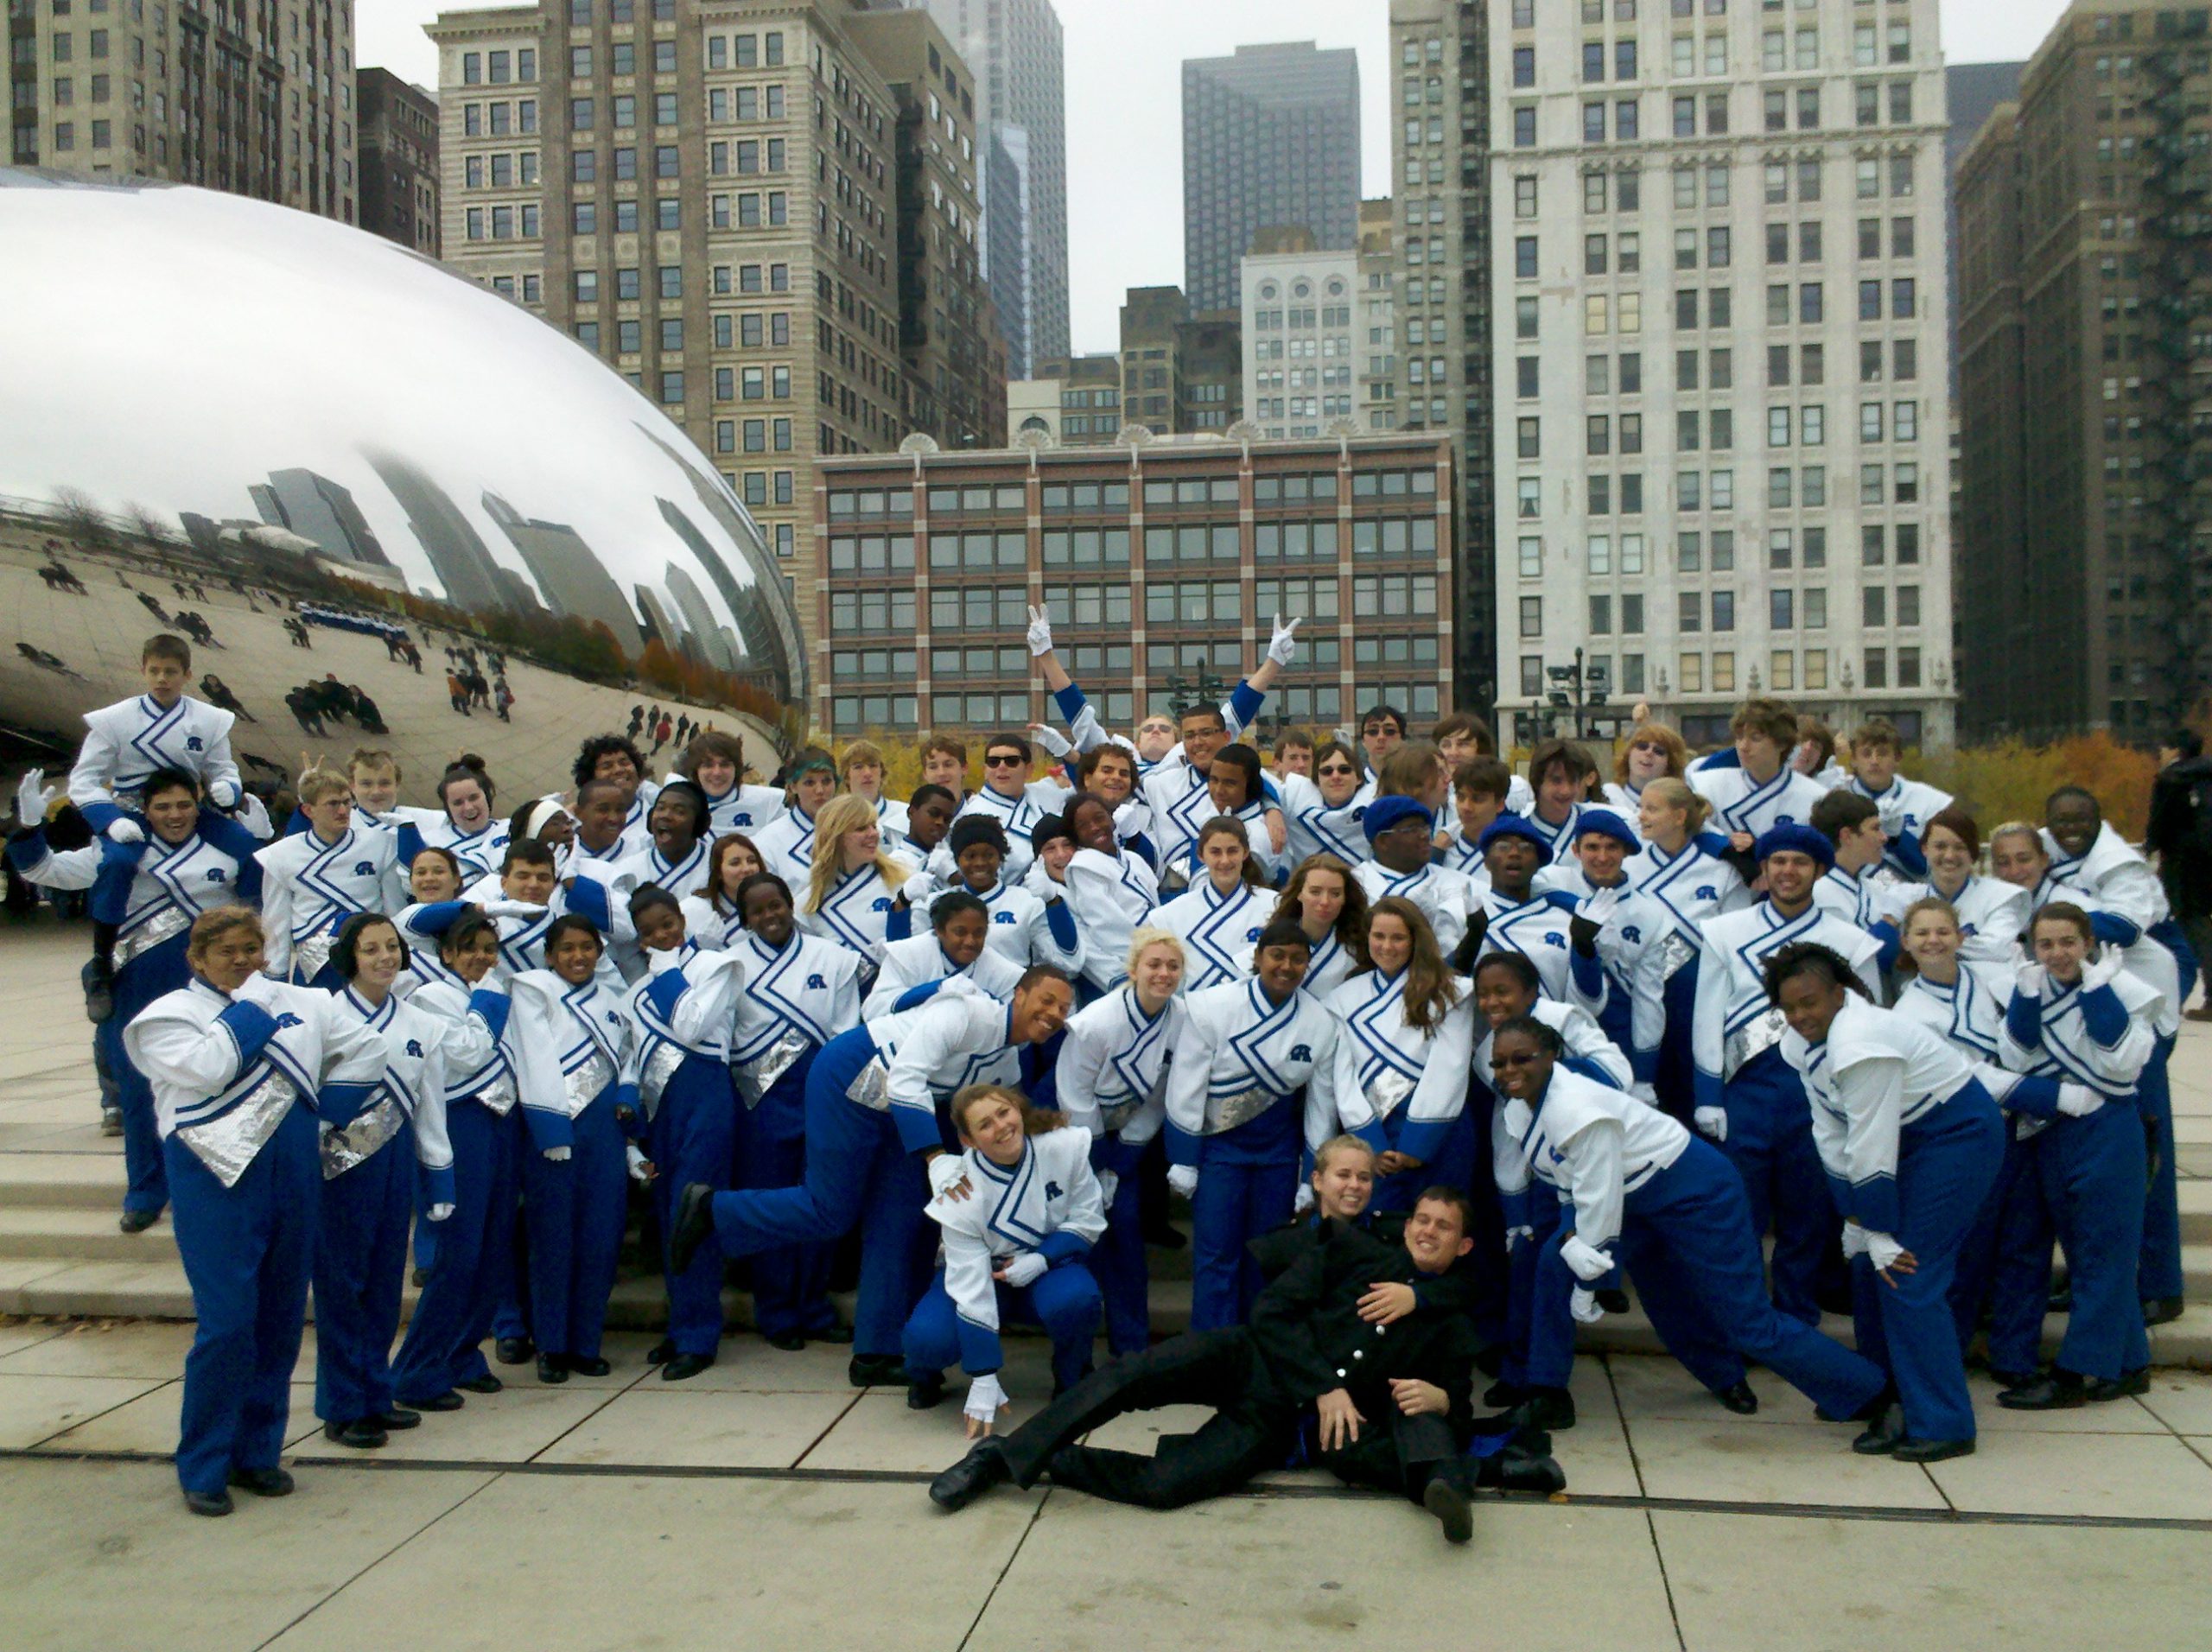 Group of middle school students dressed in matching marching band uniforms posing in front of The Bean in Chicago City